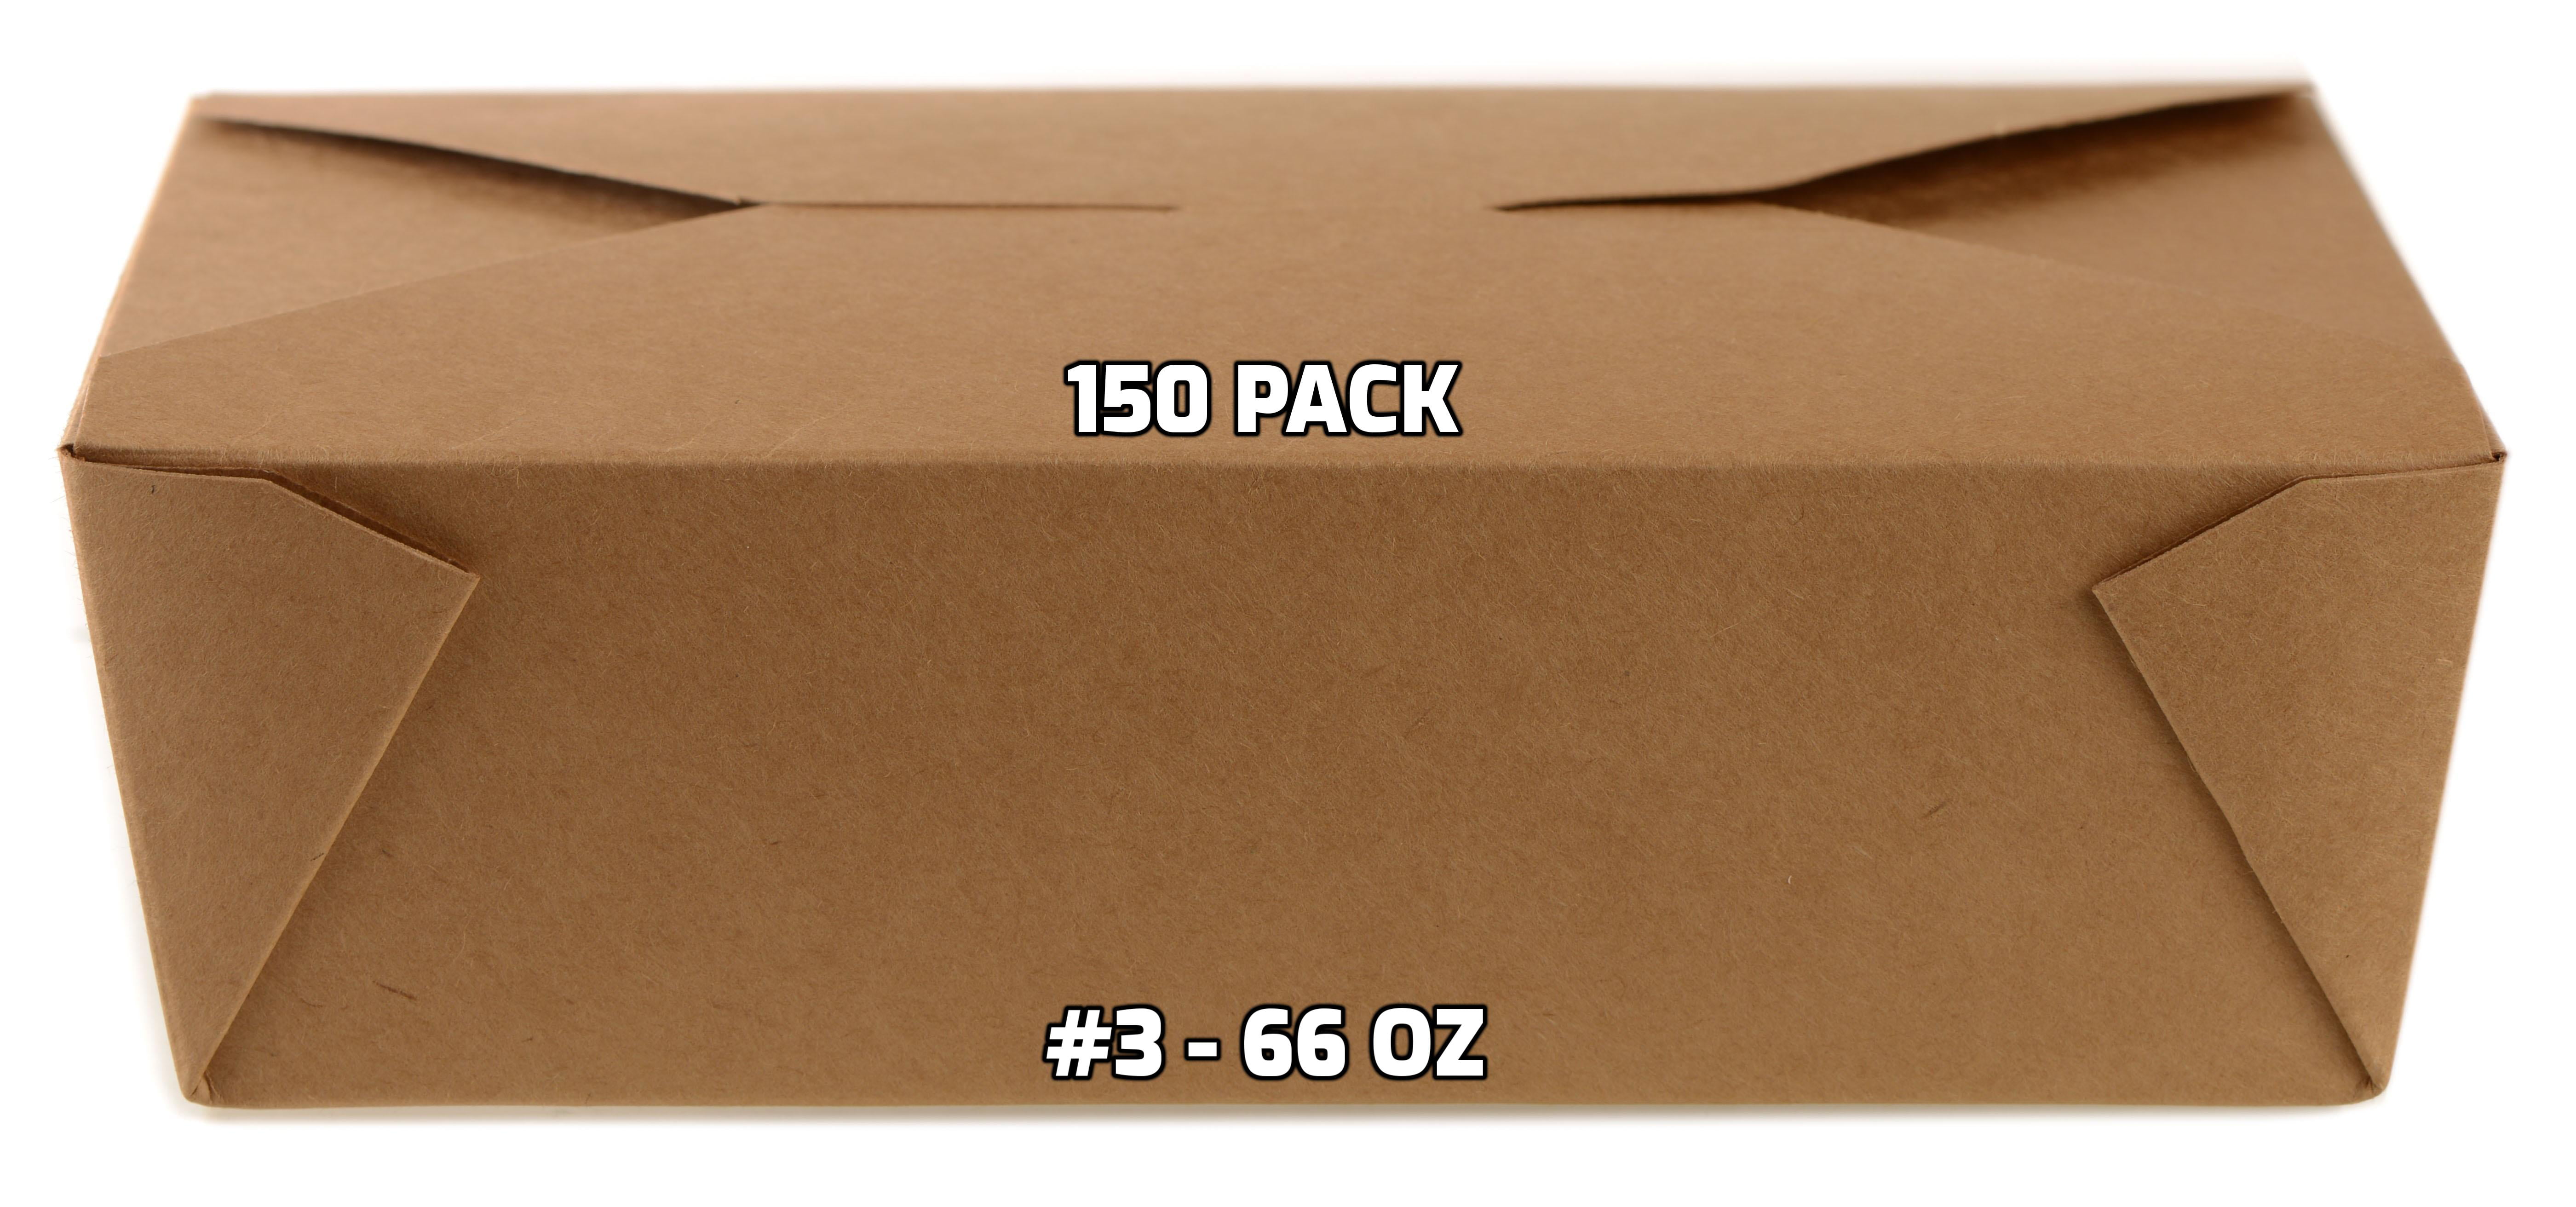 [100 PACK] Take Out Food Containers 66 oz Kraft Brown Paper Take Out Boxes  Microwaveable Leak and Grease Resistant Food Containers To Go Containers  for Restaurant, Catering Recyclable Lunch Box #3